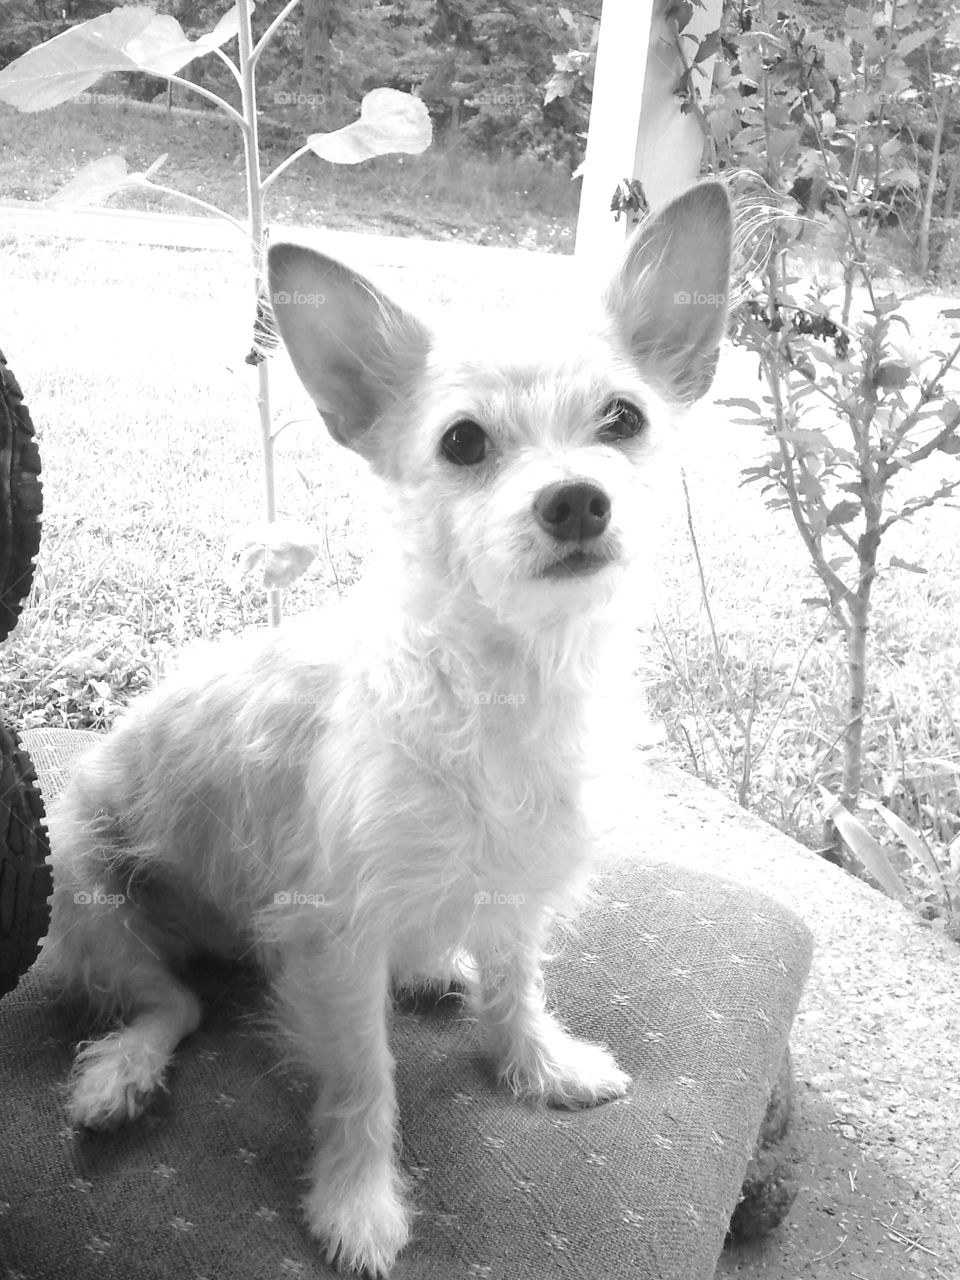 my dog bear, a terrier chihuahua mix breed